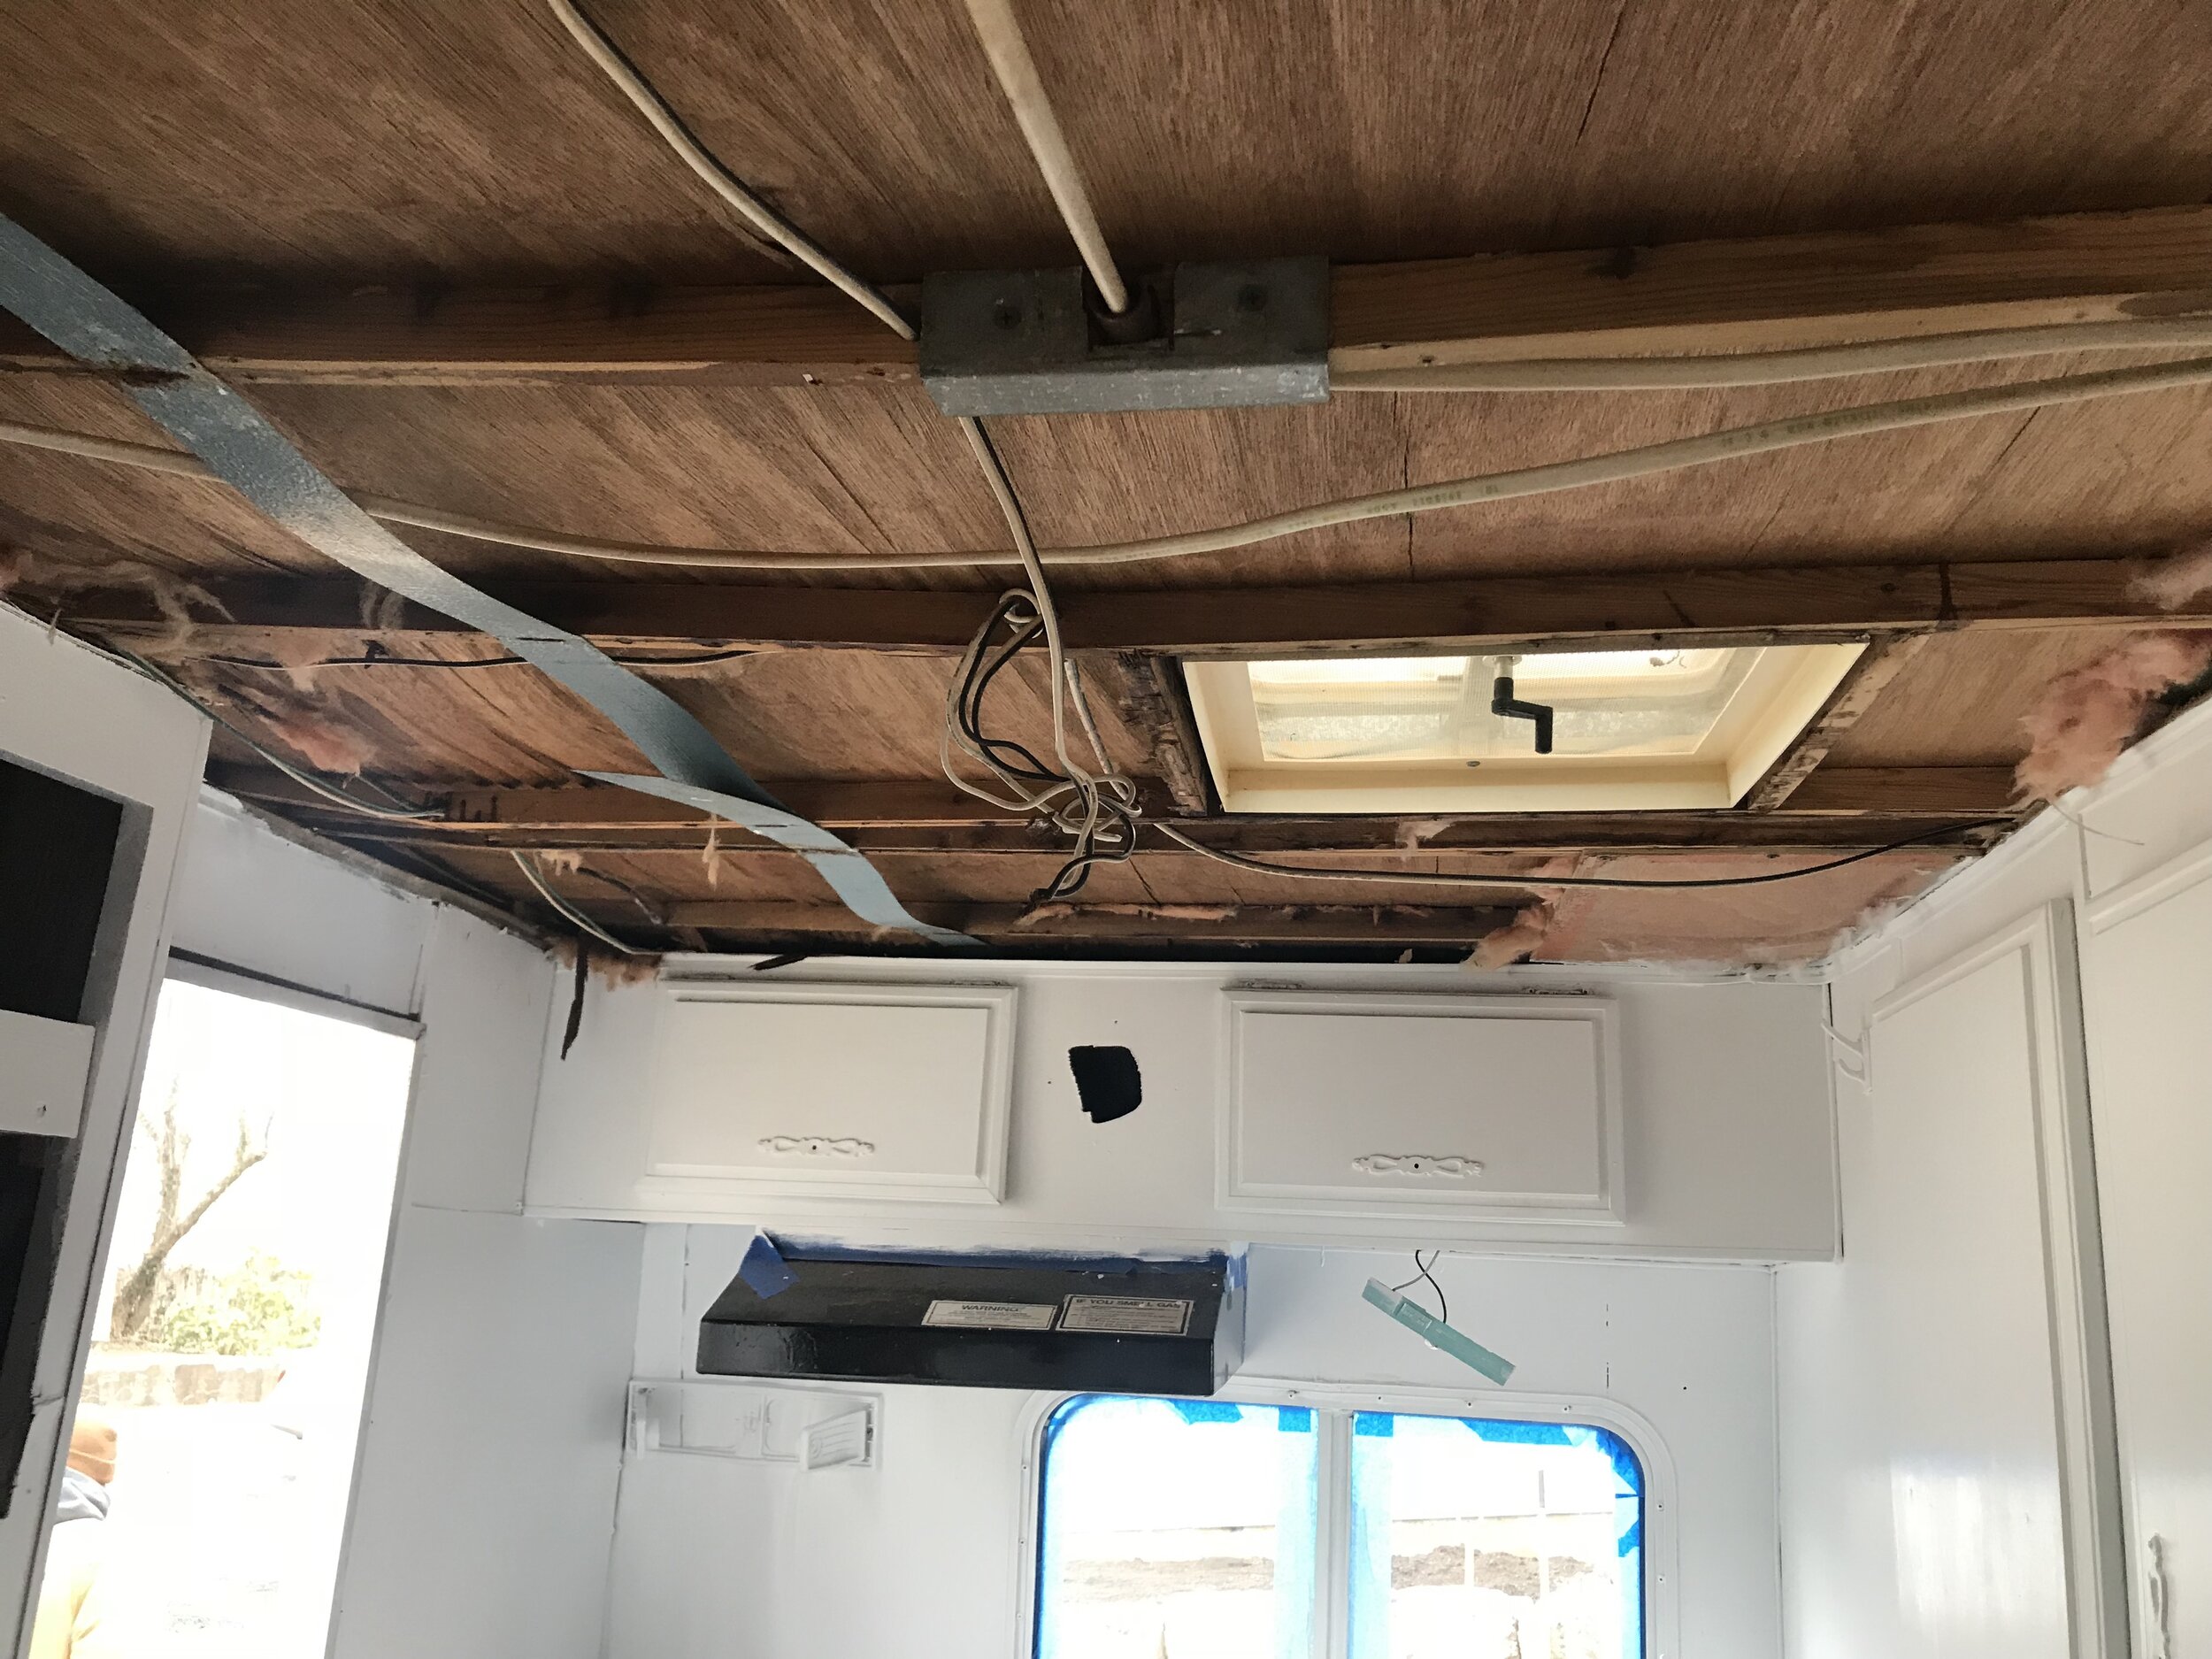 What we found was a bunch of rotted and broken roof supports due to water damage over time and poor building materials that were not meant to last 30+ years.